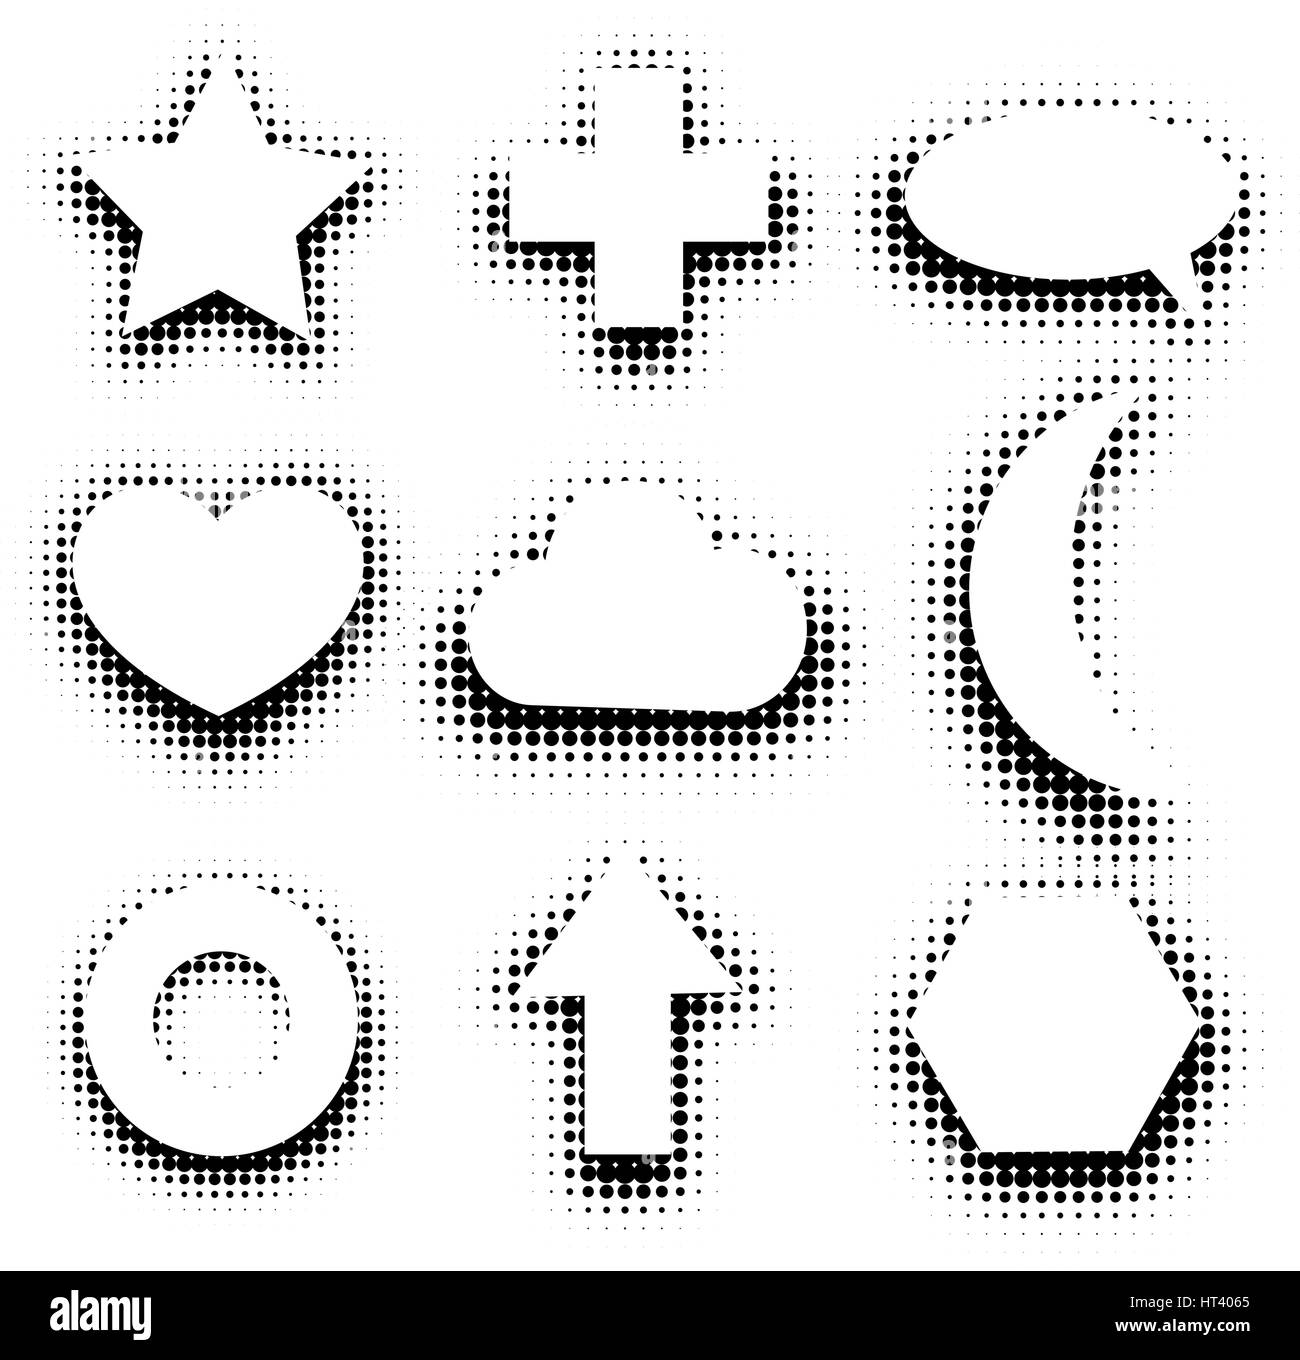 Isolated black and white color abstract dotted contour icons set, simple flat star, cross, speech bubble,heart,cloud,moon,circle,arrow,hexagon signs collection vector illustration Stock Vector